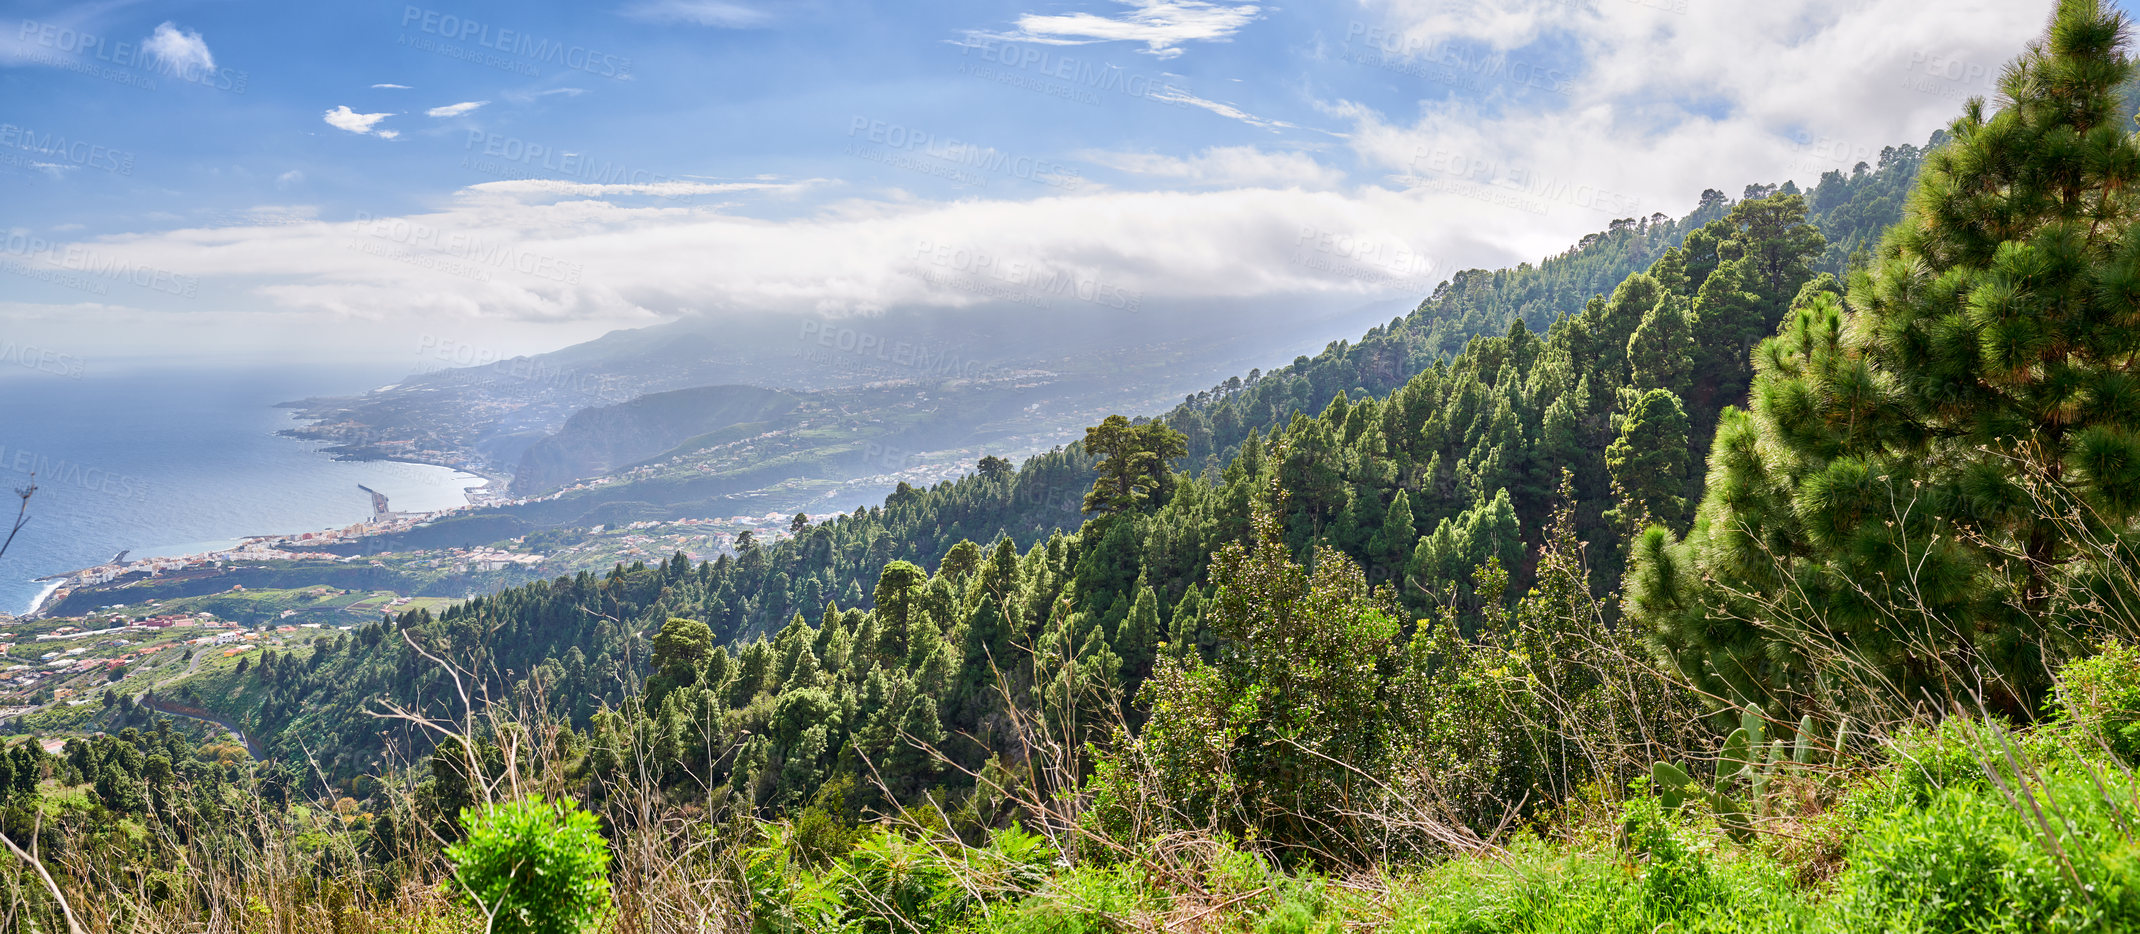 Buy stock photo Landscape of cedar pine trees growing in mountain woods of La Palma, Canary Islands, Spain. Green coniferous forest in remote countryside overlooking a coastal city. Environmental nature conservation